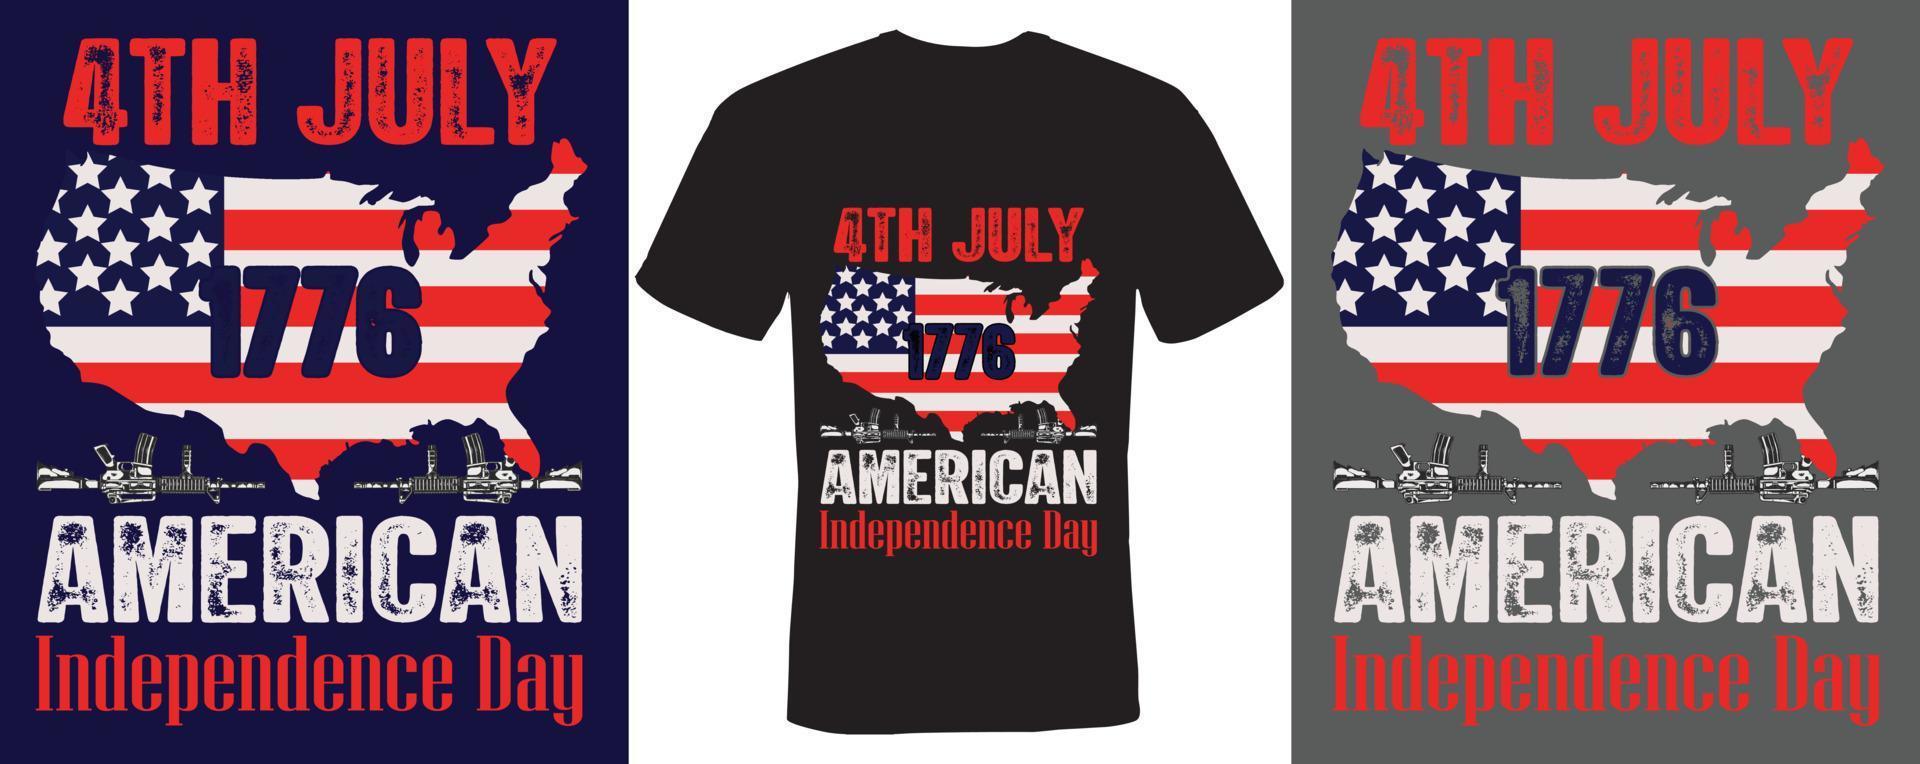 4th july 1776 American independence day T-shirt design for American vector